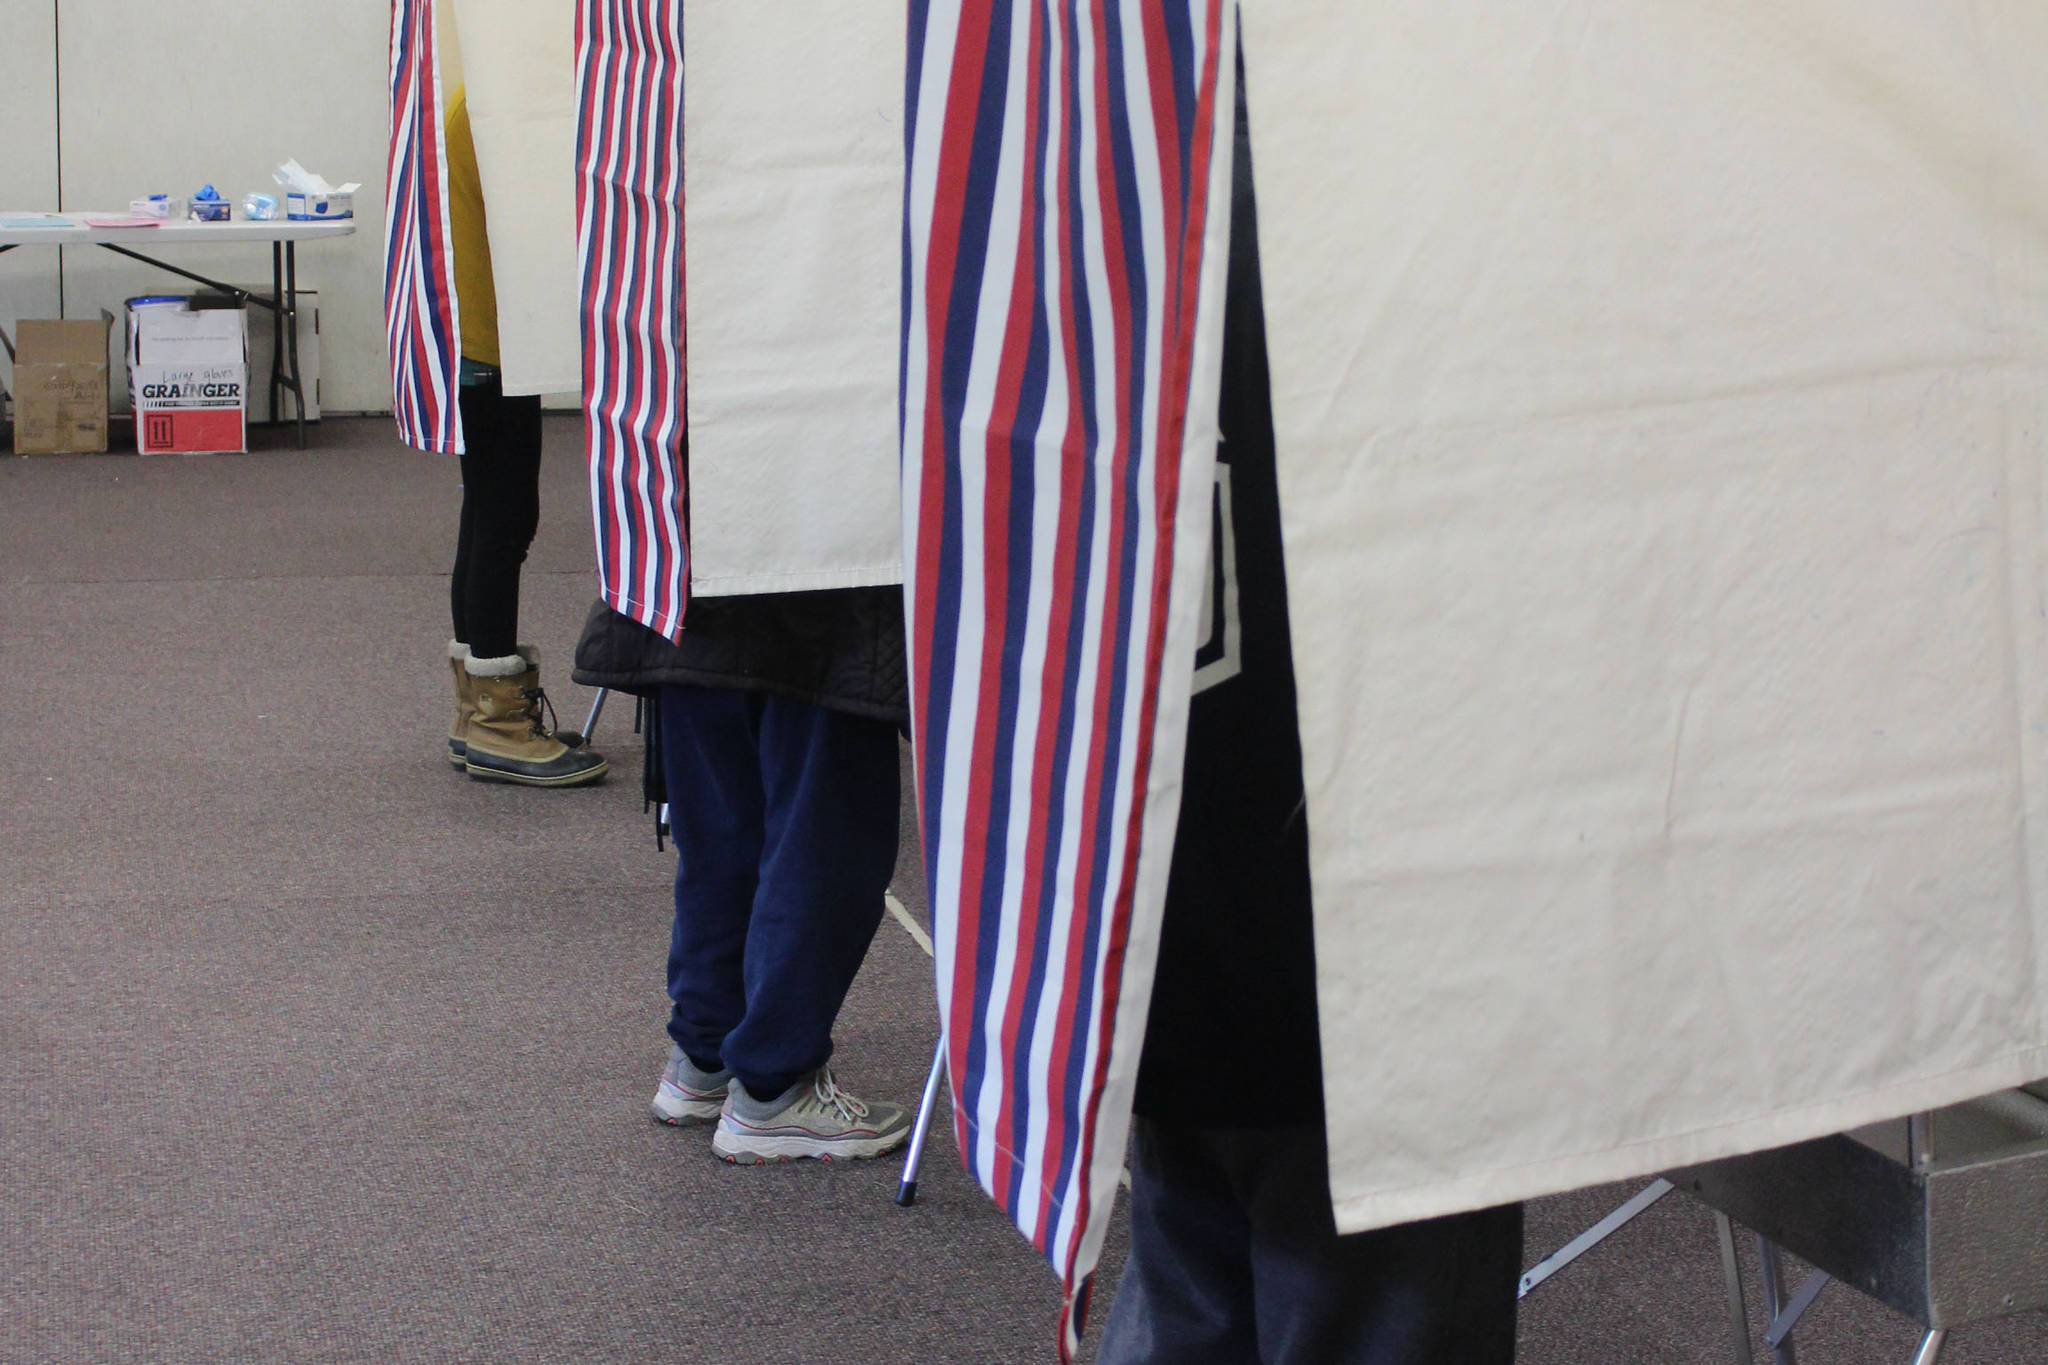 Voters fill out ballots in voting booths at the Soldotna Regional Sports Complex on Tuesday, Nov. 3, 2020, in Soldotna, Alaska. (Photo by Ashlyn O’Hara/Peninsula Clarion)